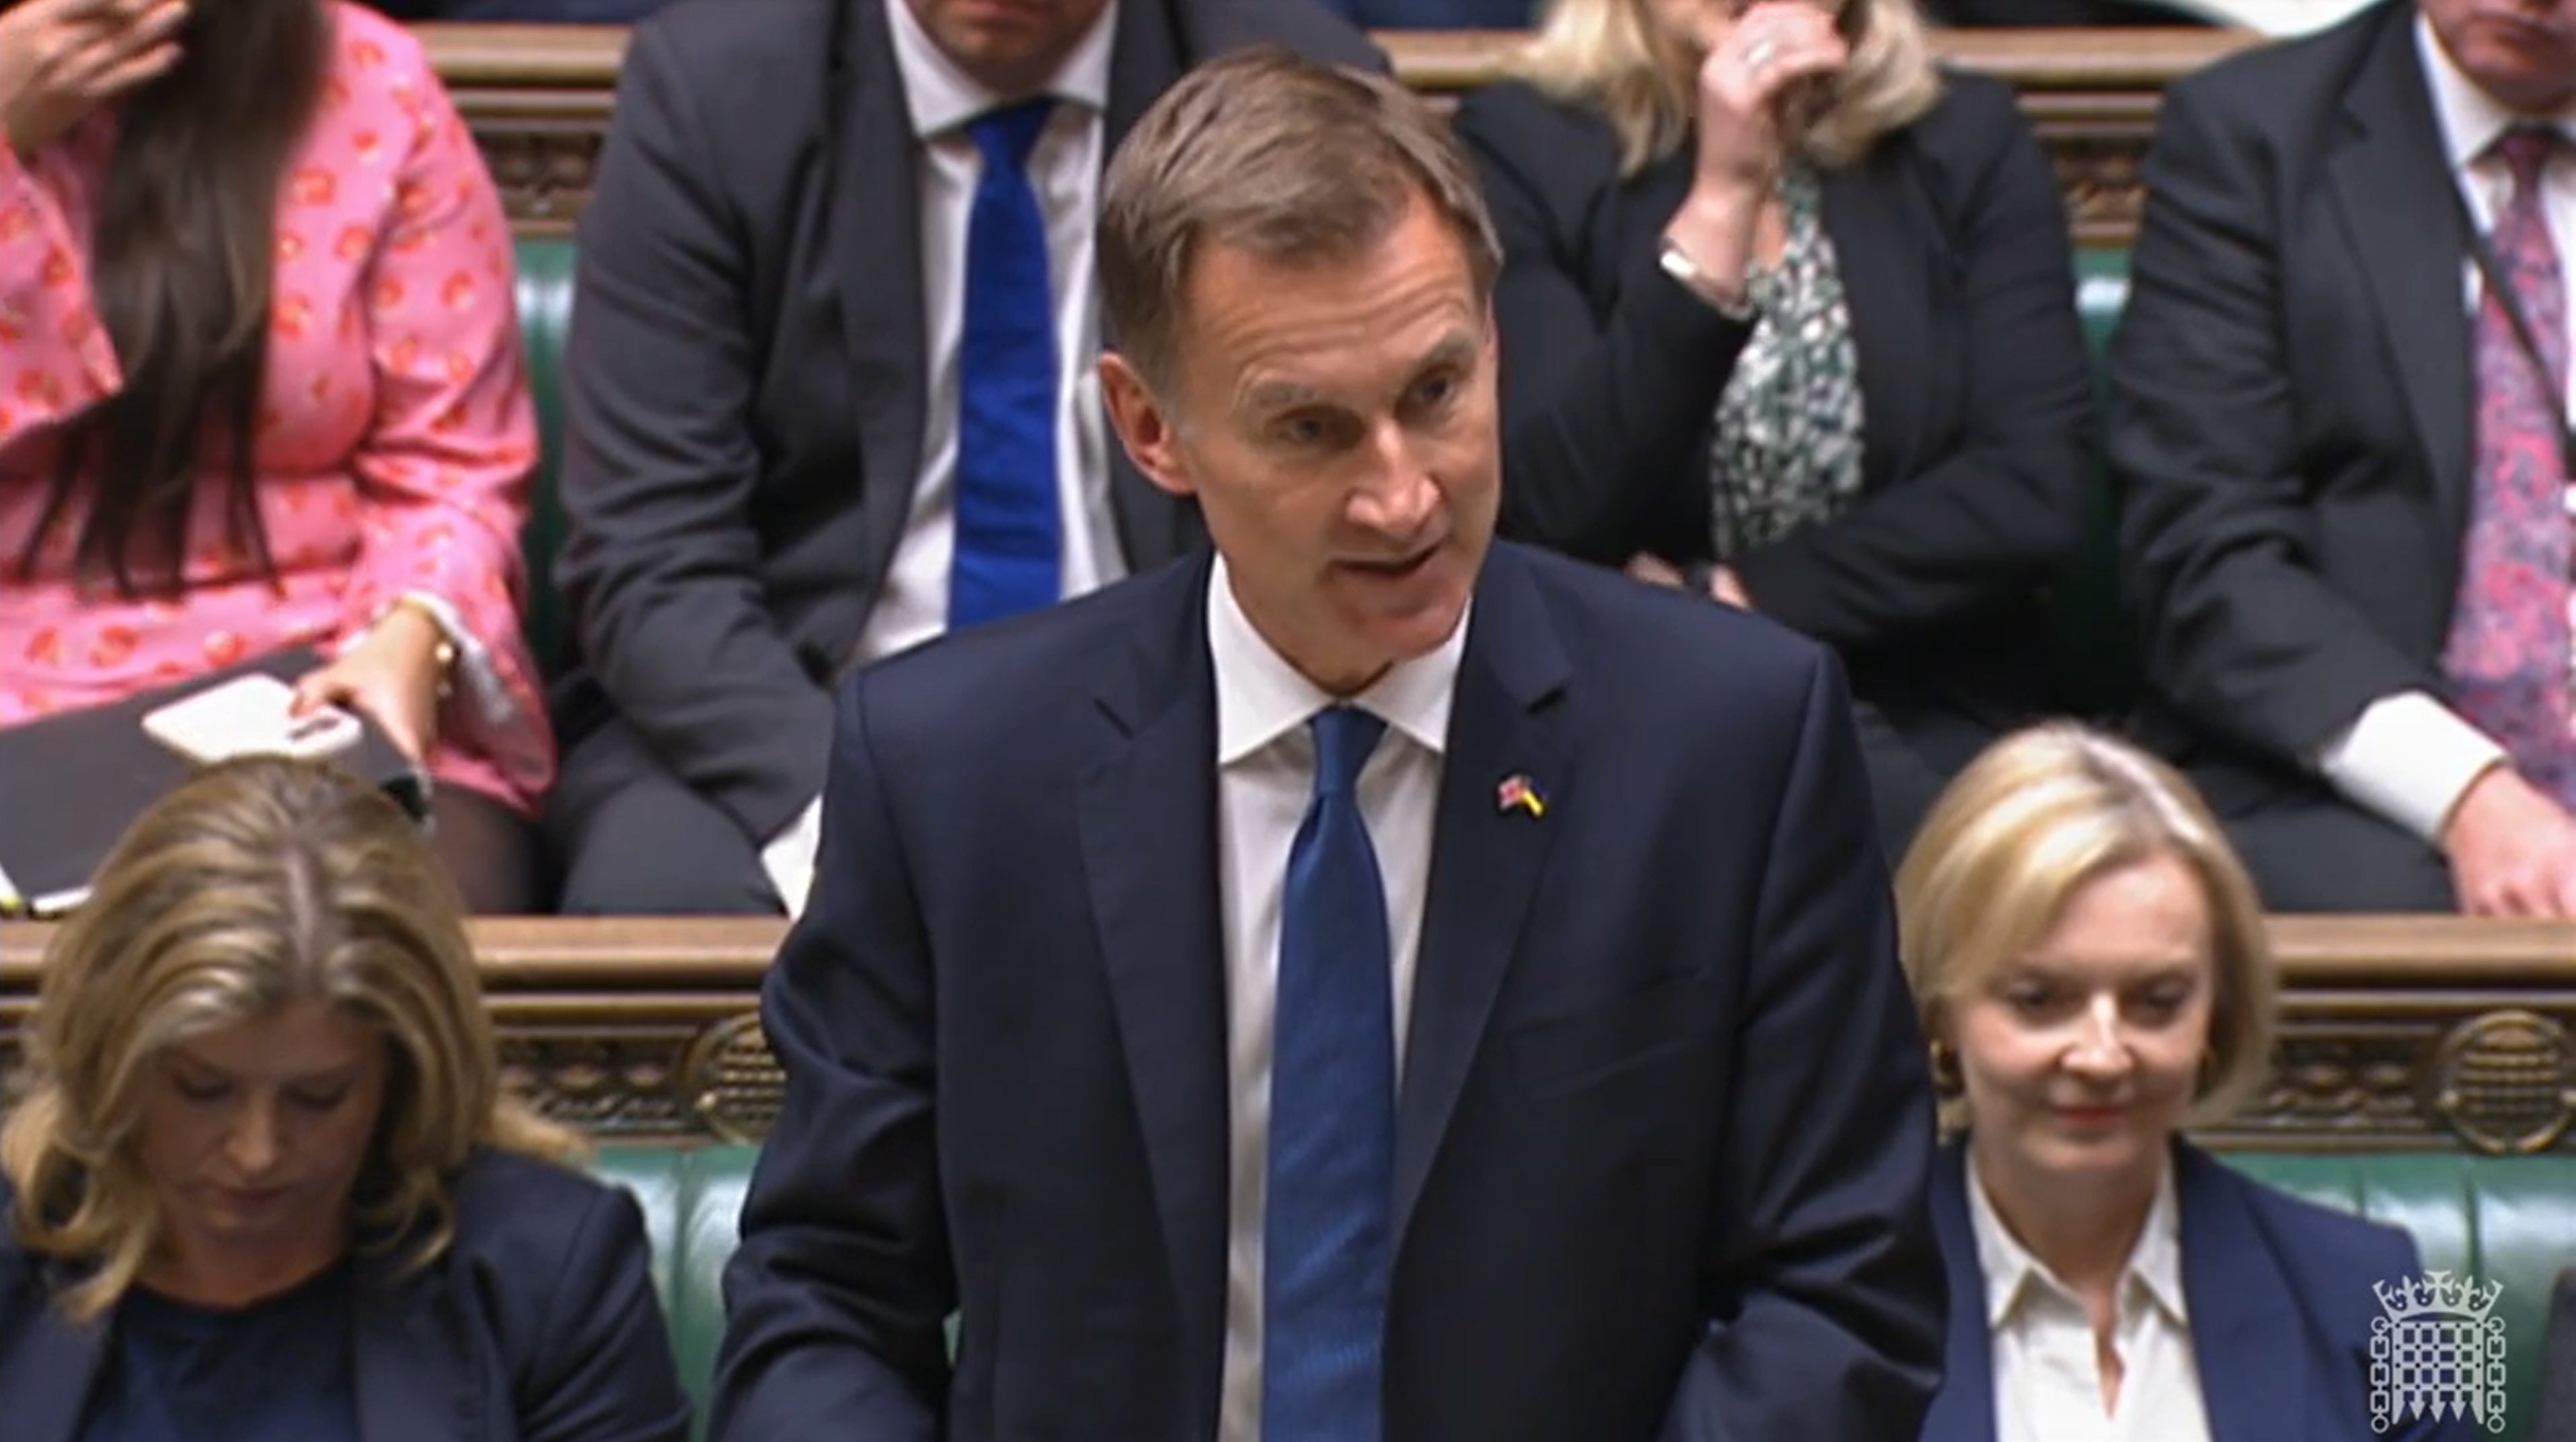 Jeremy Hunt responded to the inflation figures by saying that the government would deliver economic stability